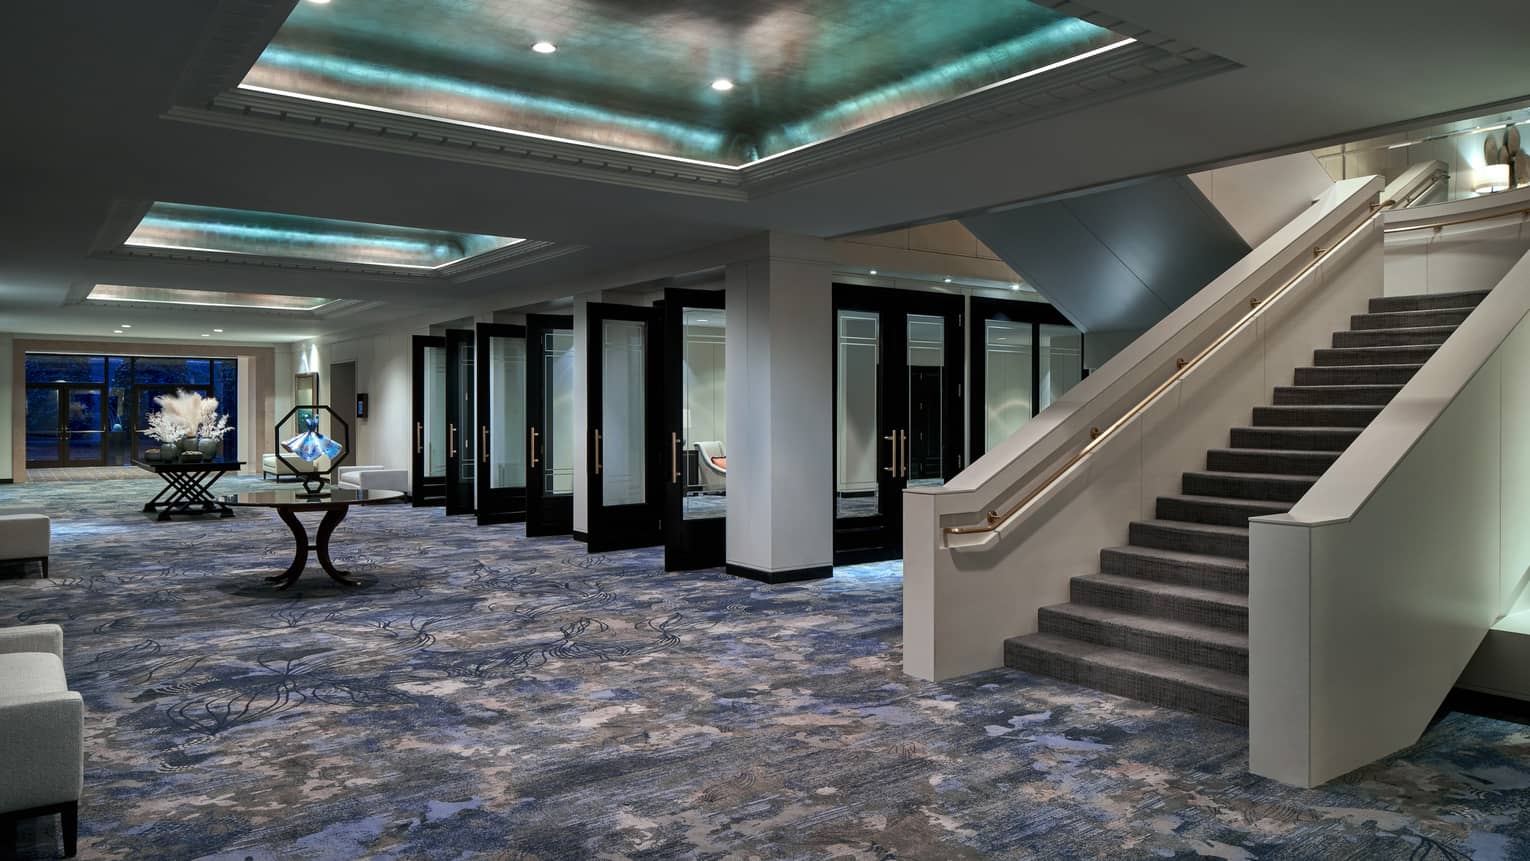 Events hall with blue-ish carpeting, grand staircase and inset metallic ceiling with recessed lights